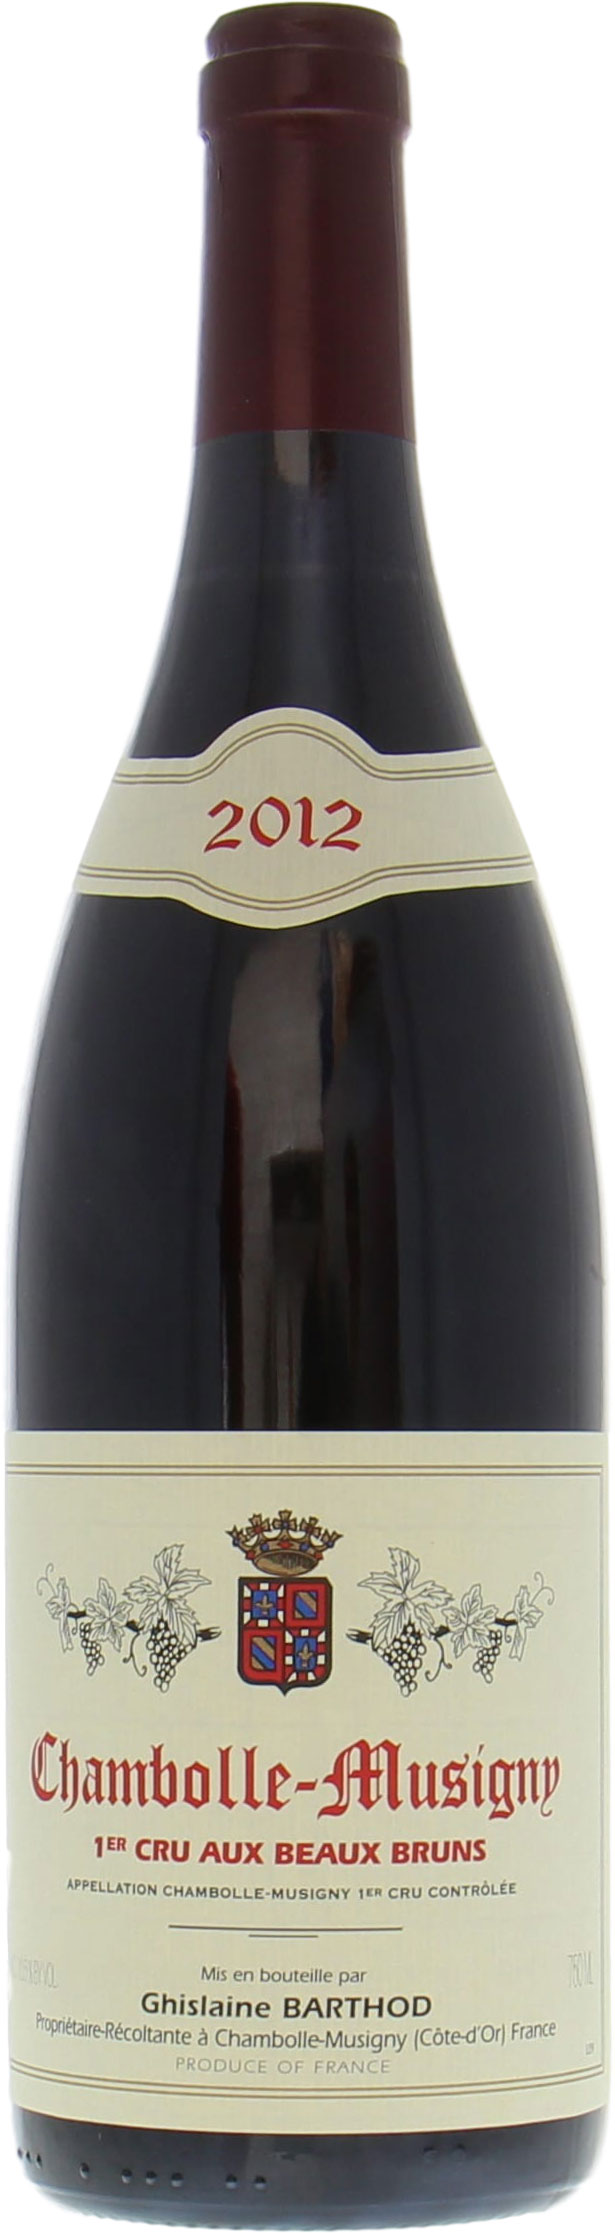 Ghislaine Barthod - Chambolle Musigny Aux Beaux Bruns 2012 Perfect